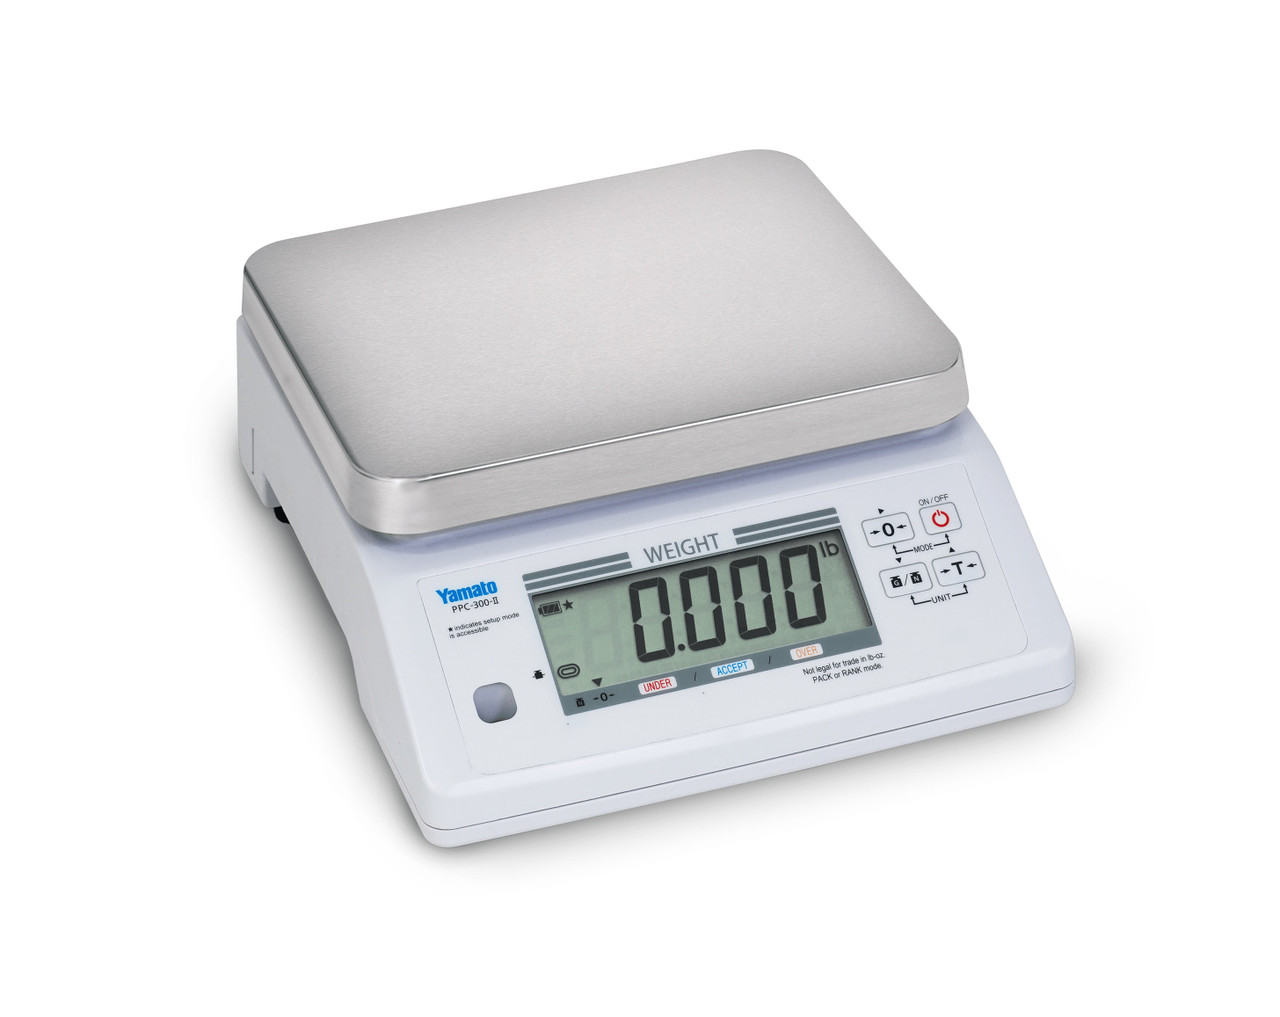 Yamato PPC-300 - Portion Control Scale - All Models